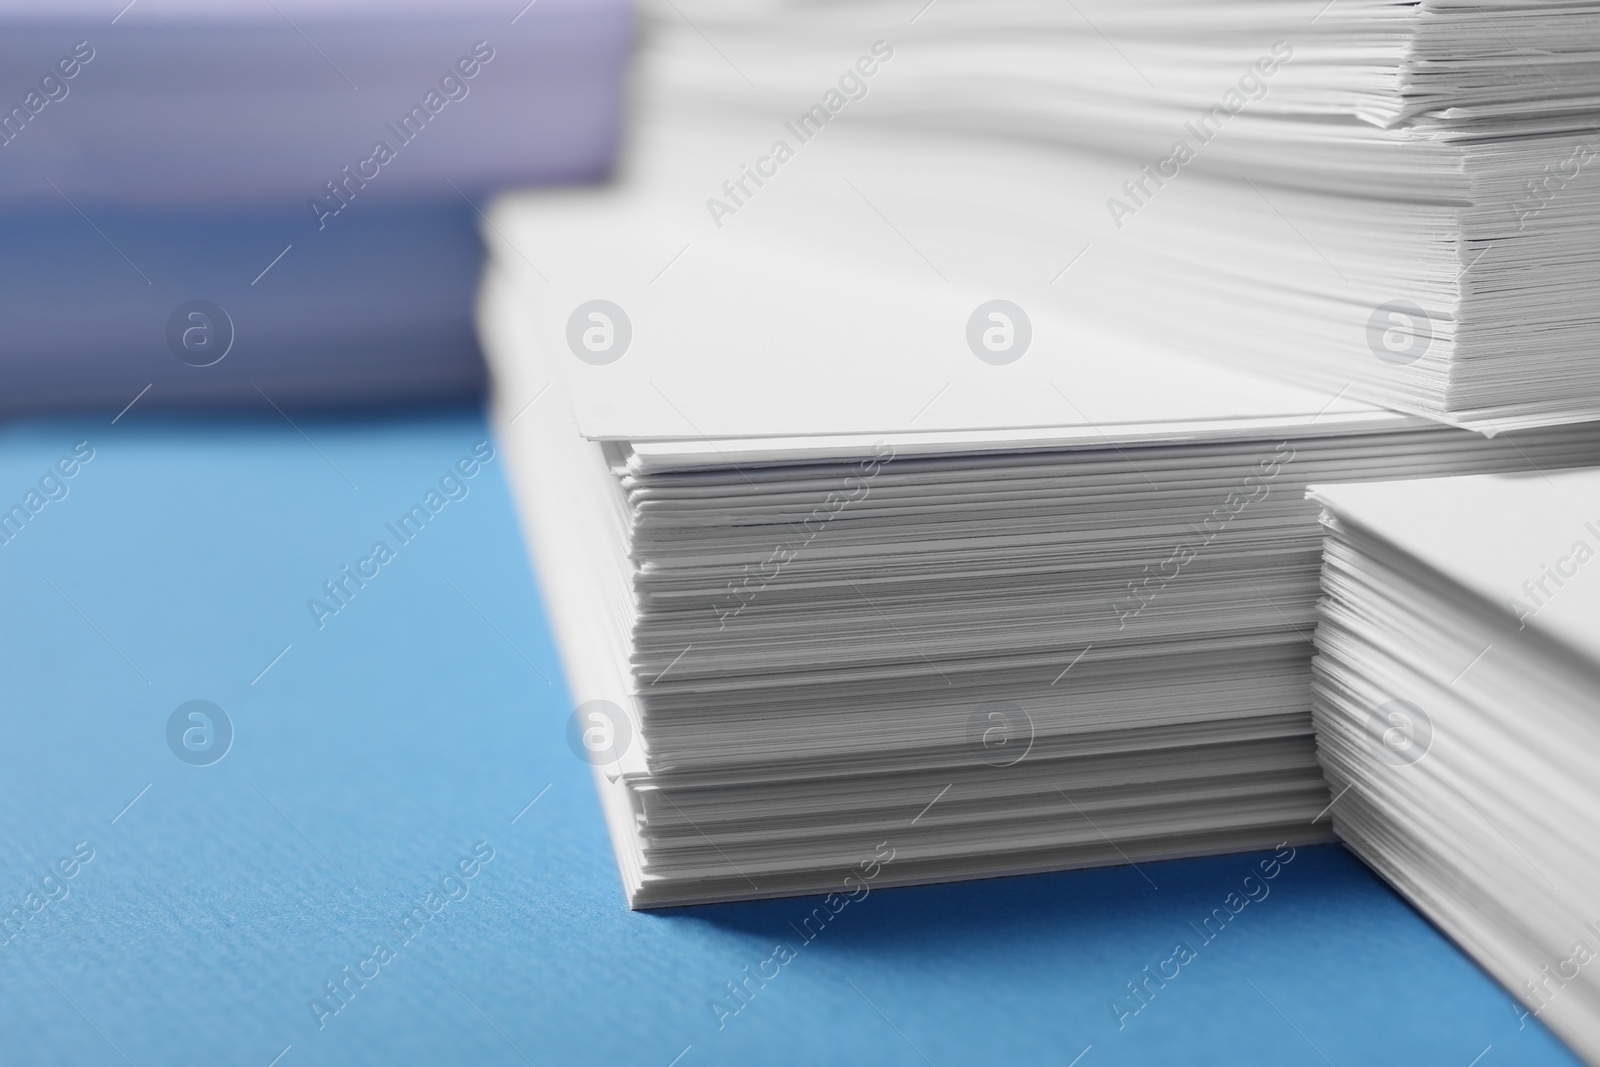 Photo of Many stacks of paper sheets on light blue background, closeup